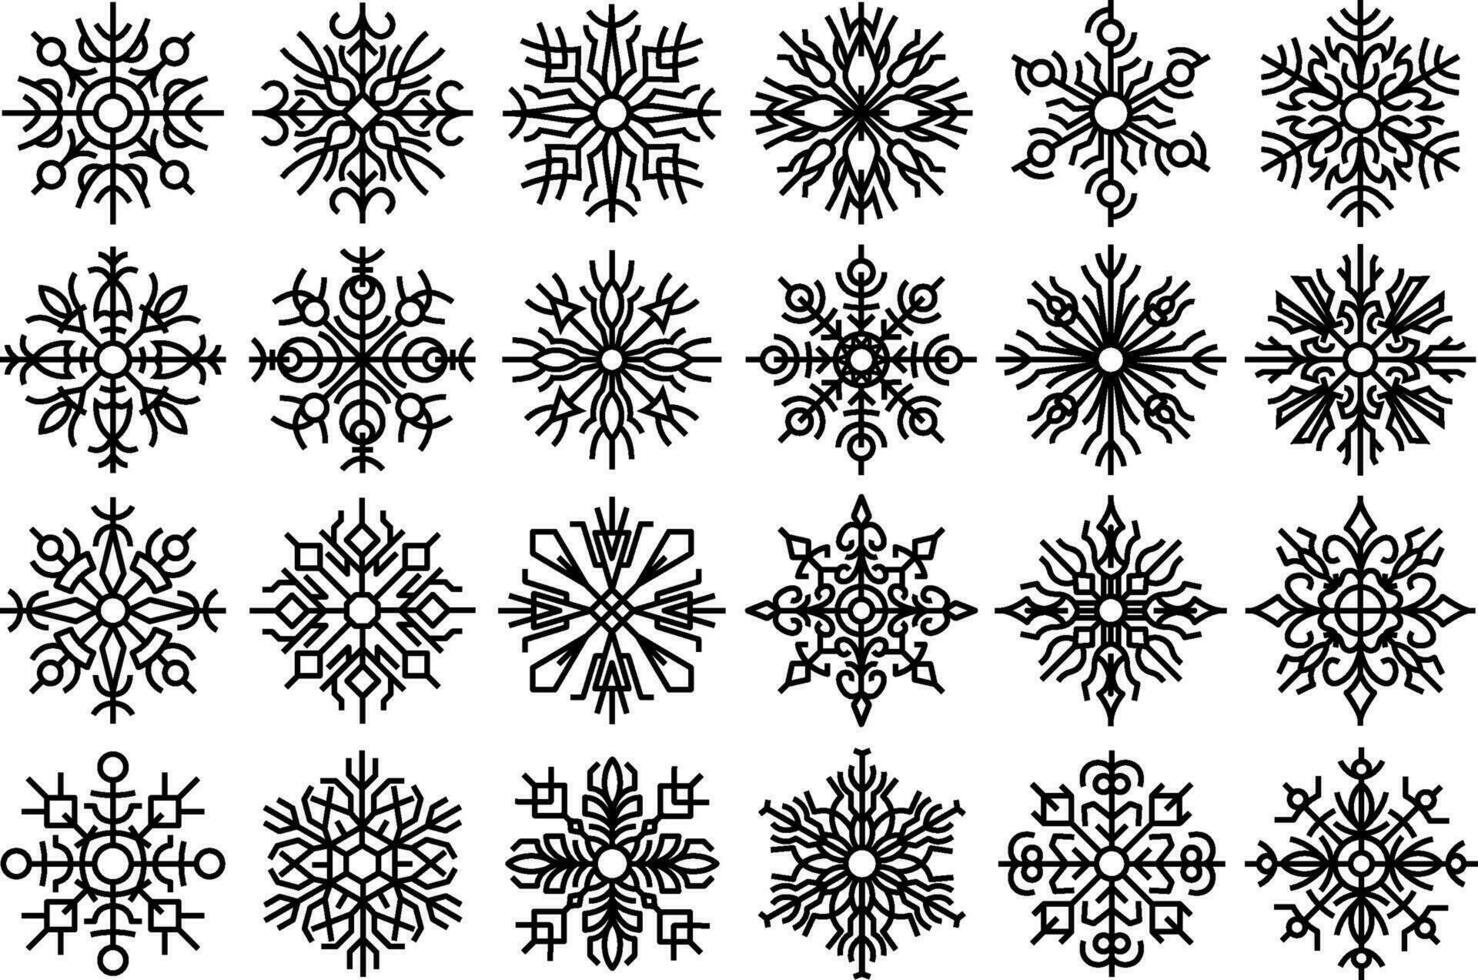 Snowflakes abstract designs set. Collection of beautiful snow flake designs for winter and Christmas decorations. black linear snow icons, abstract stylized illustrations, isolated on white background vector